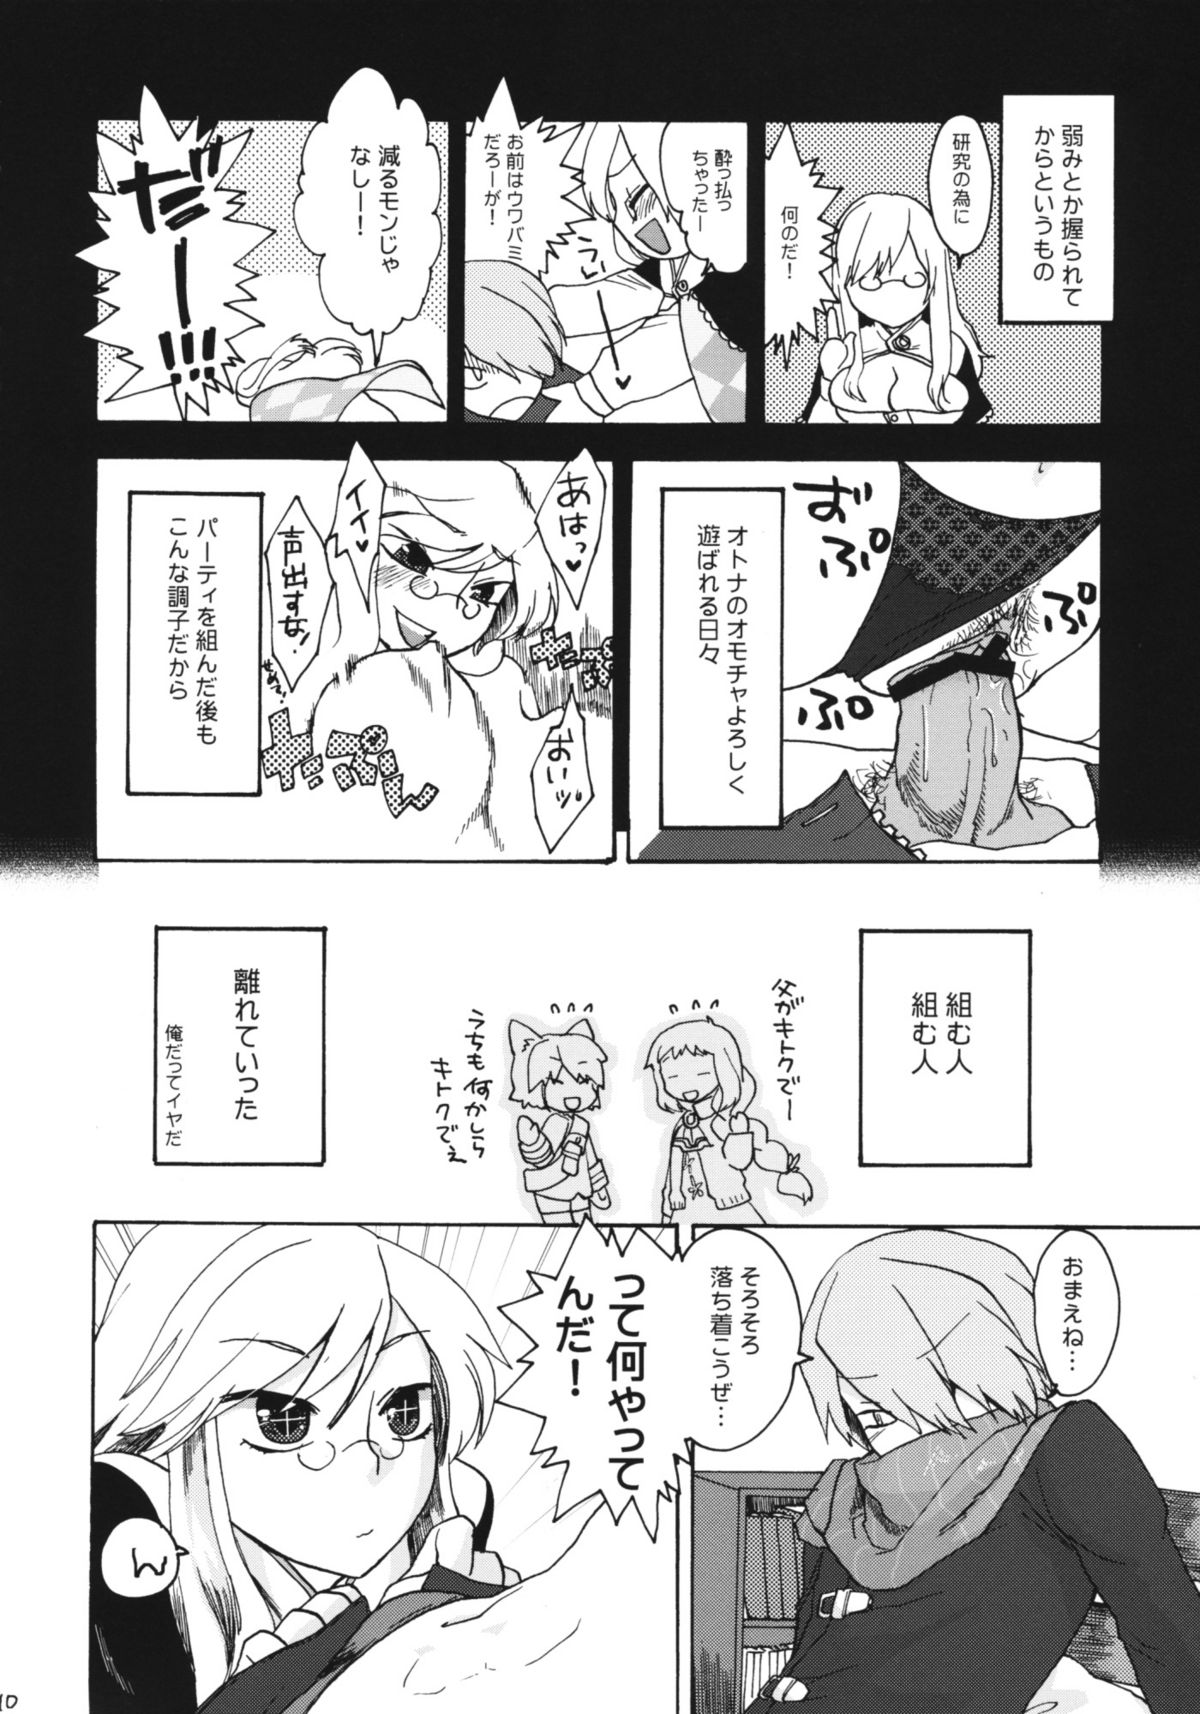 (ComiComi13) [Trip Spider (niwacho)] In You And Me (7th DRAGON) page 9 full